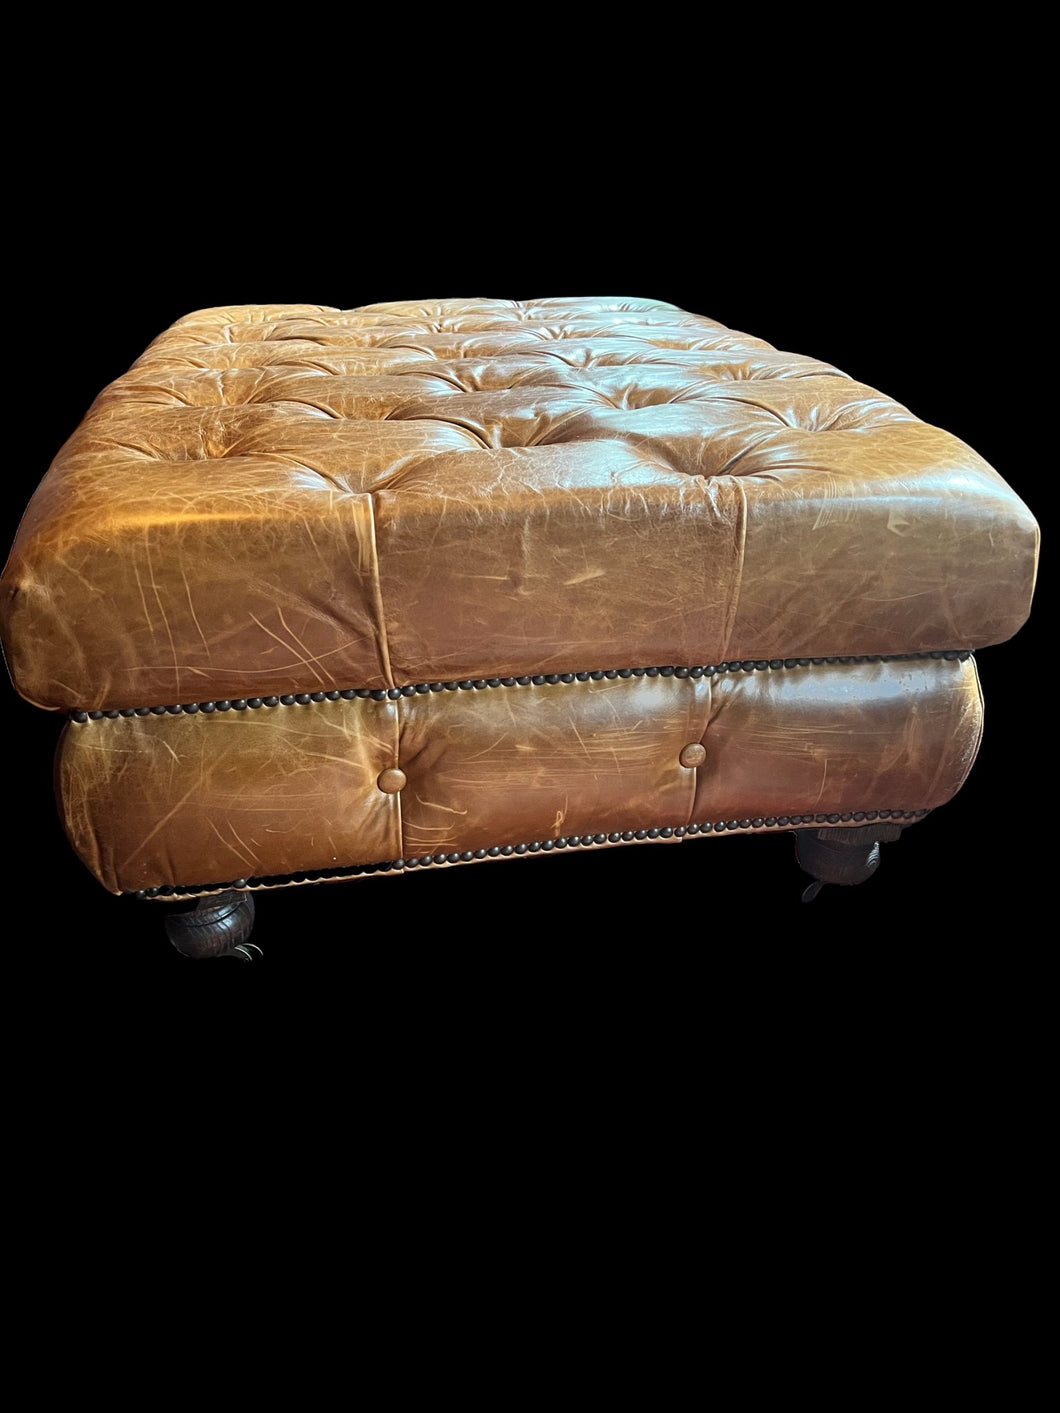 Restoration hardware, Cambridge Chesterfield, Leather Tufted, cocktail ottoman - Vintage AnthropologyVintage Anthropology